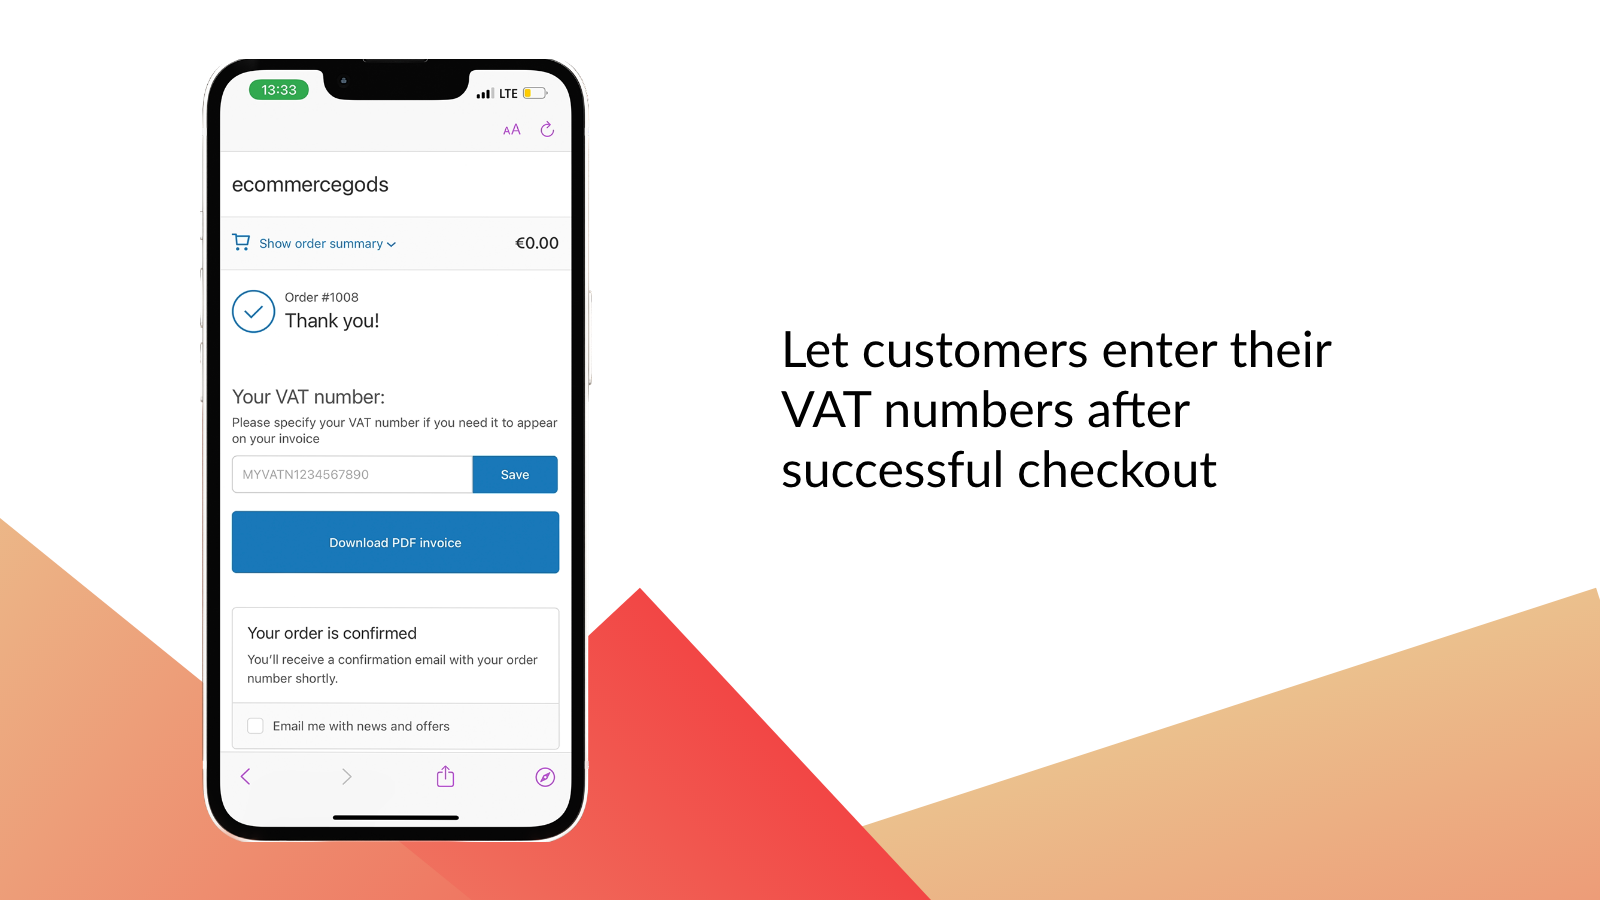 Let customers enter their VAT numbers after successful checkout